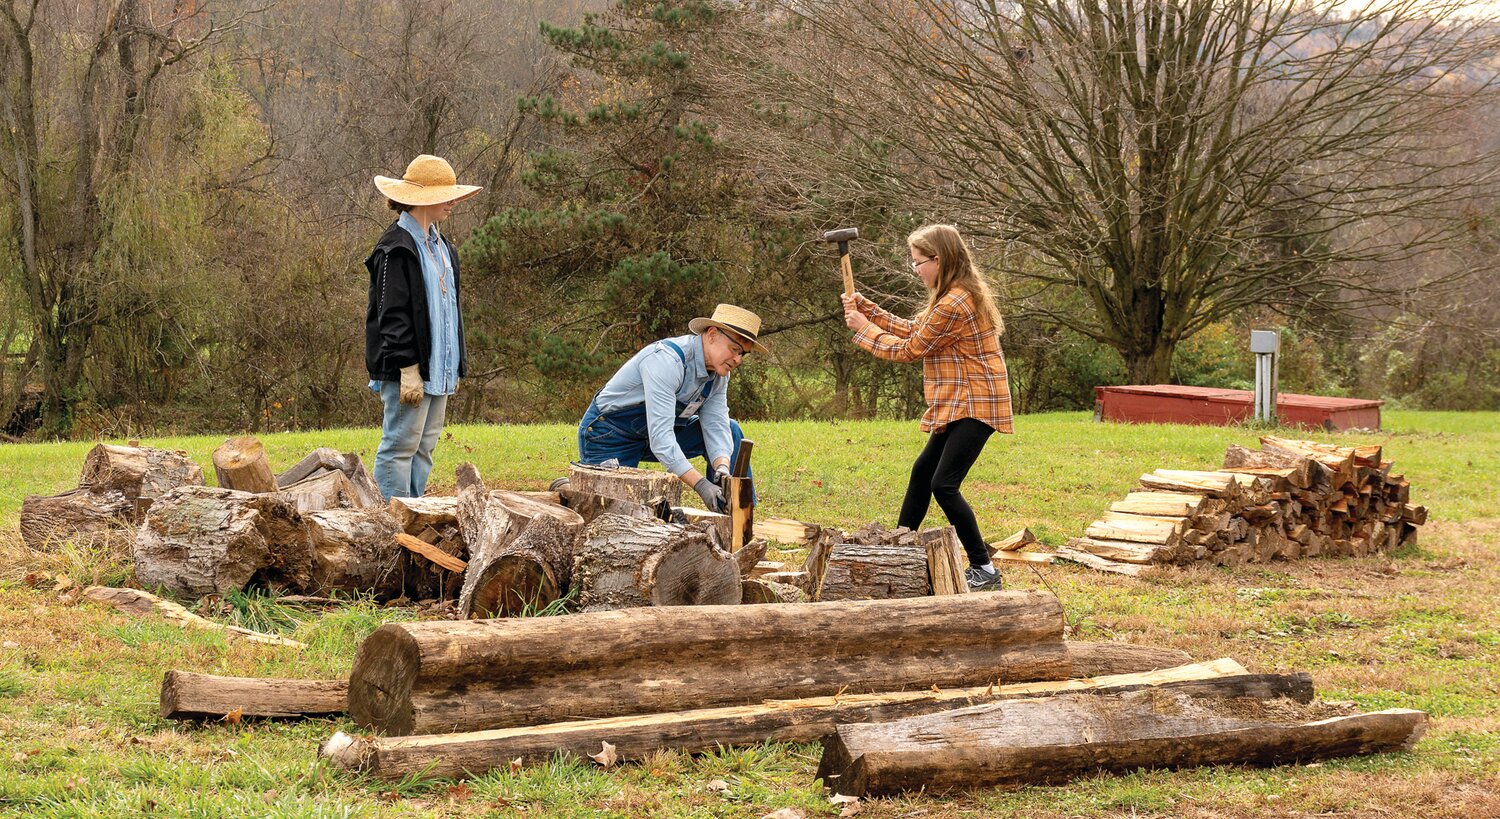 Workers get an assist in splitting wood at Howell Living History Farm.